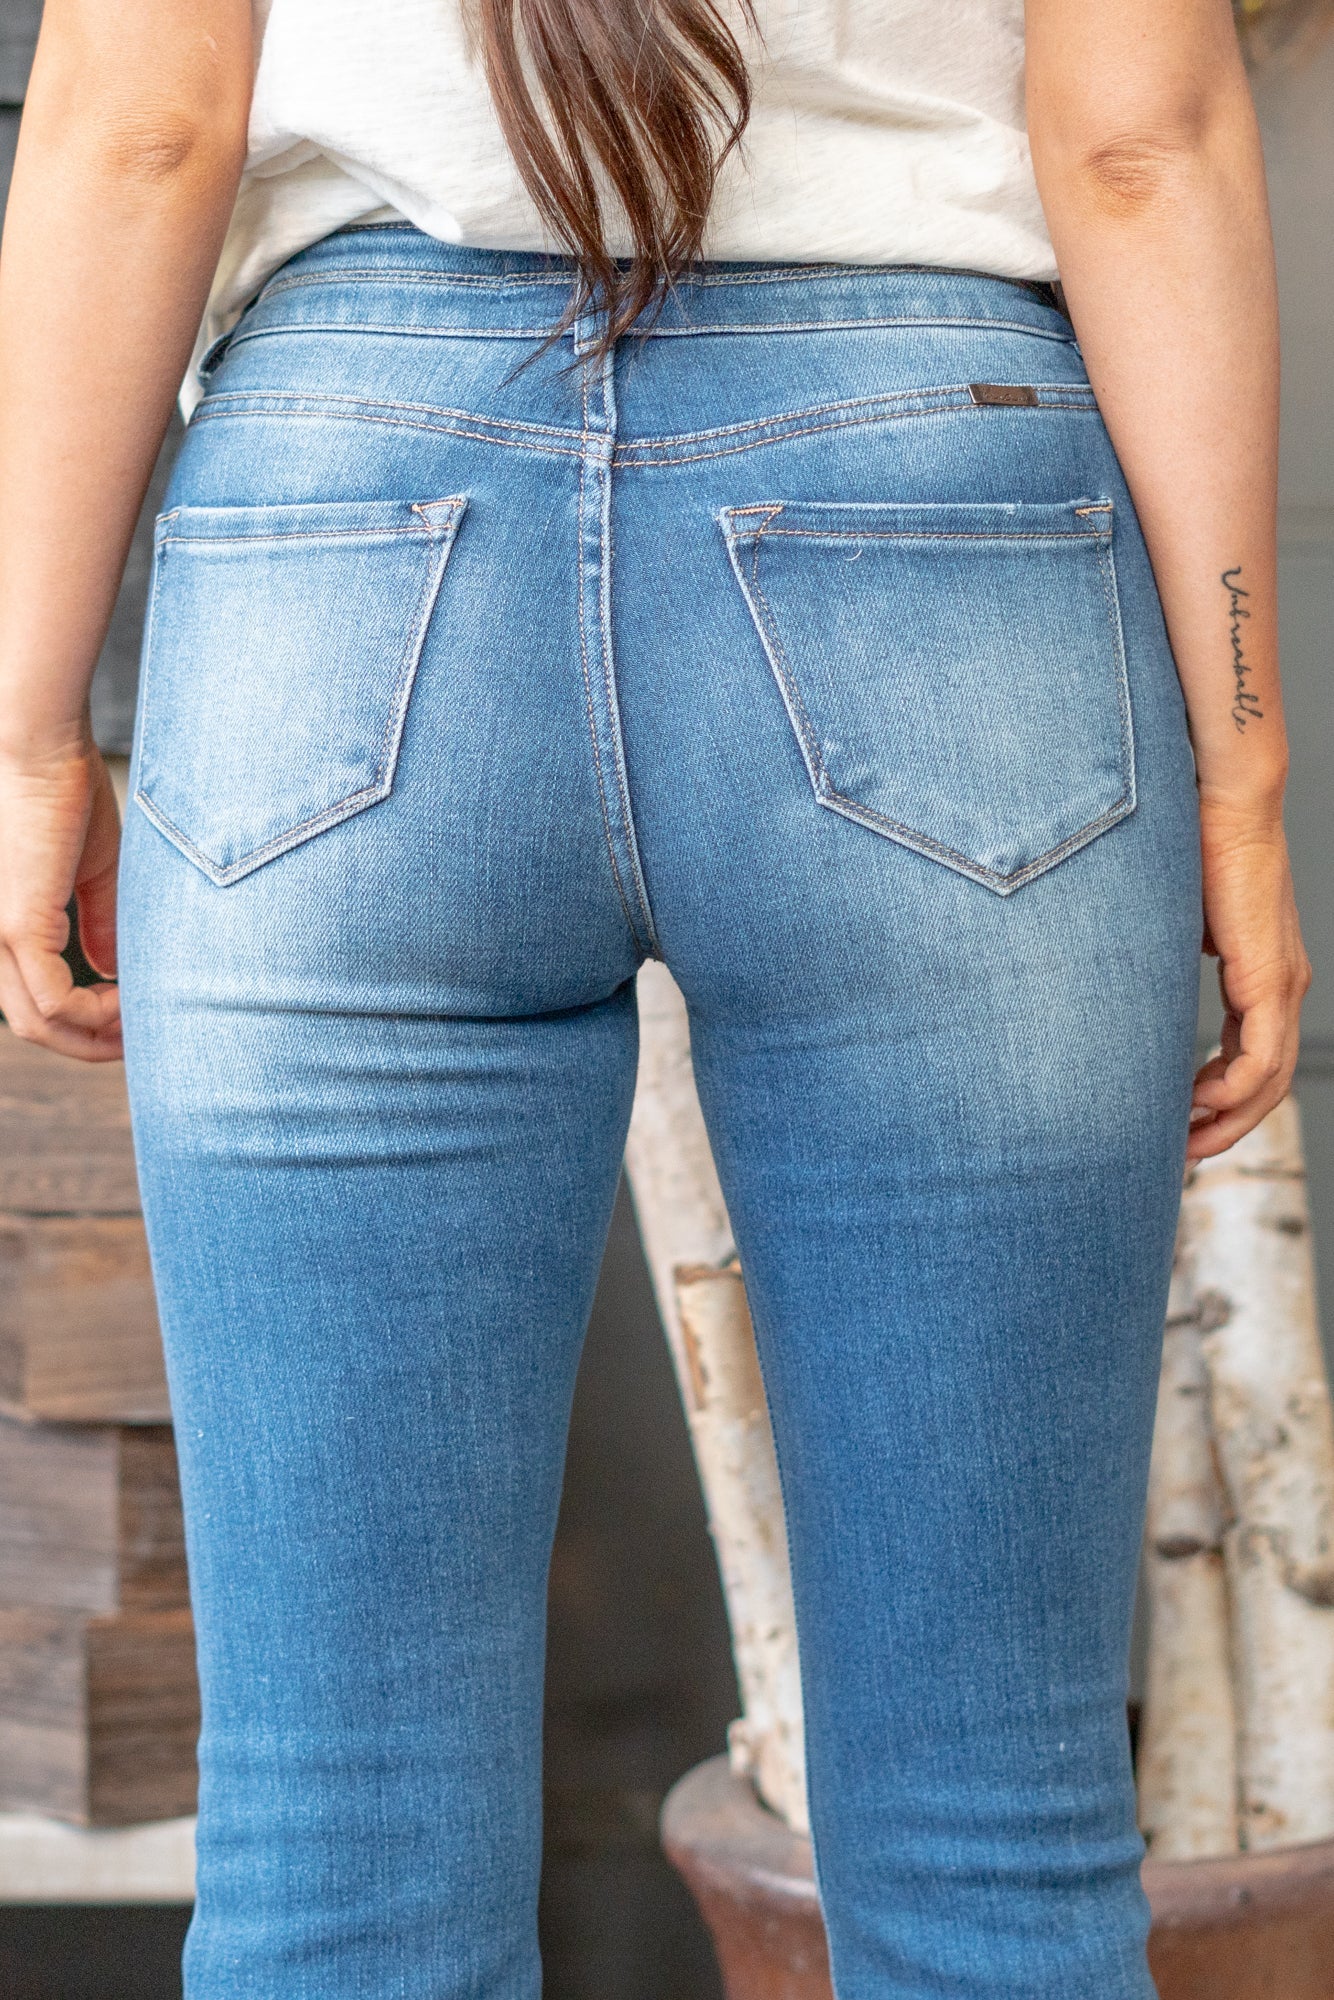 Denim Waistband Extender from More of Me to Love® 